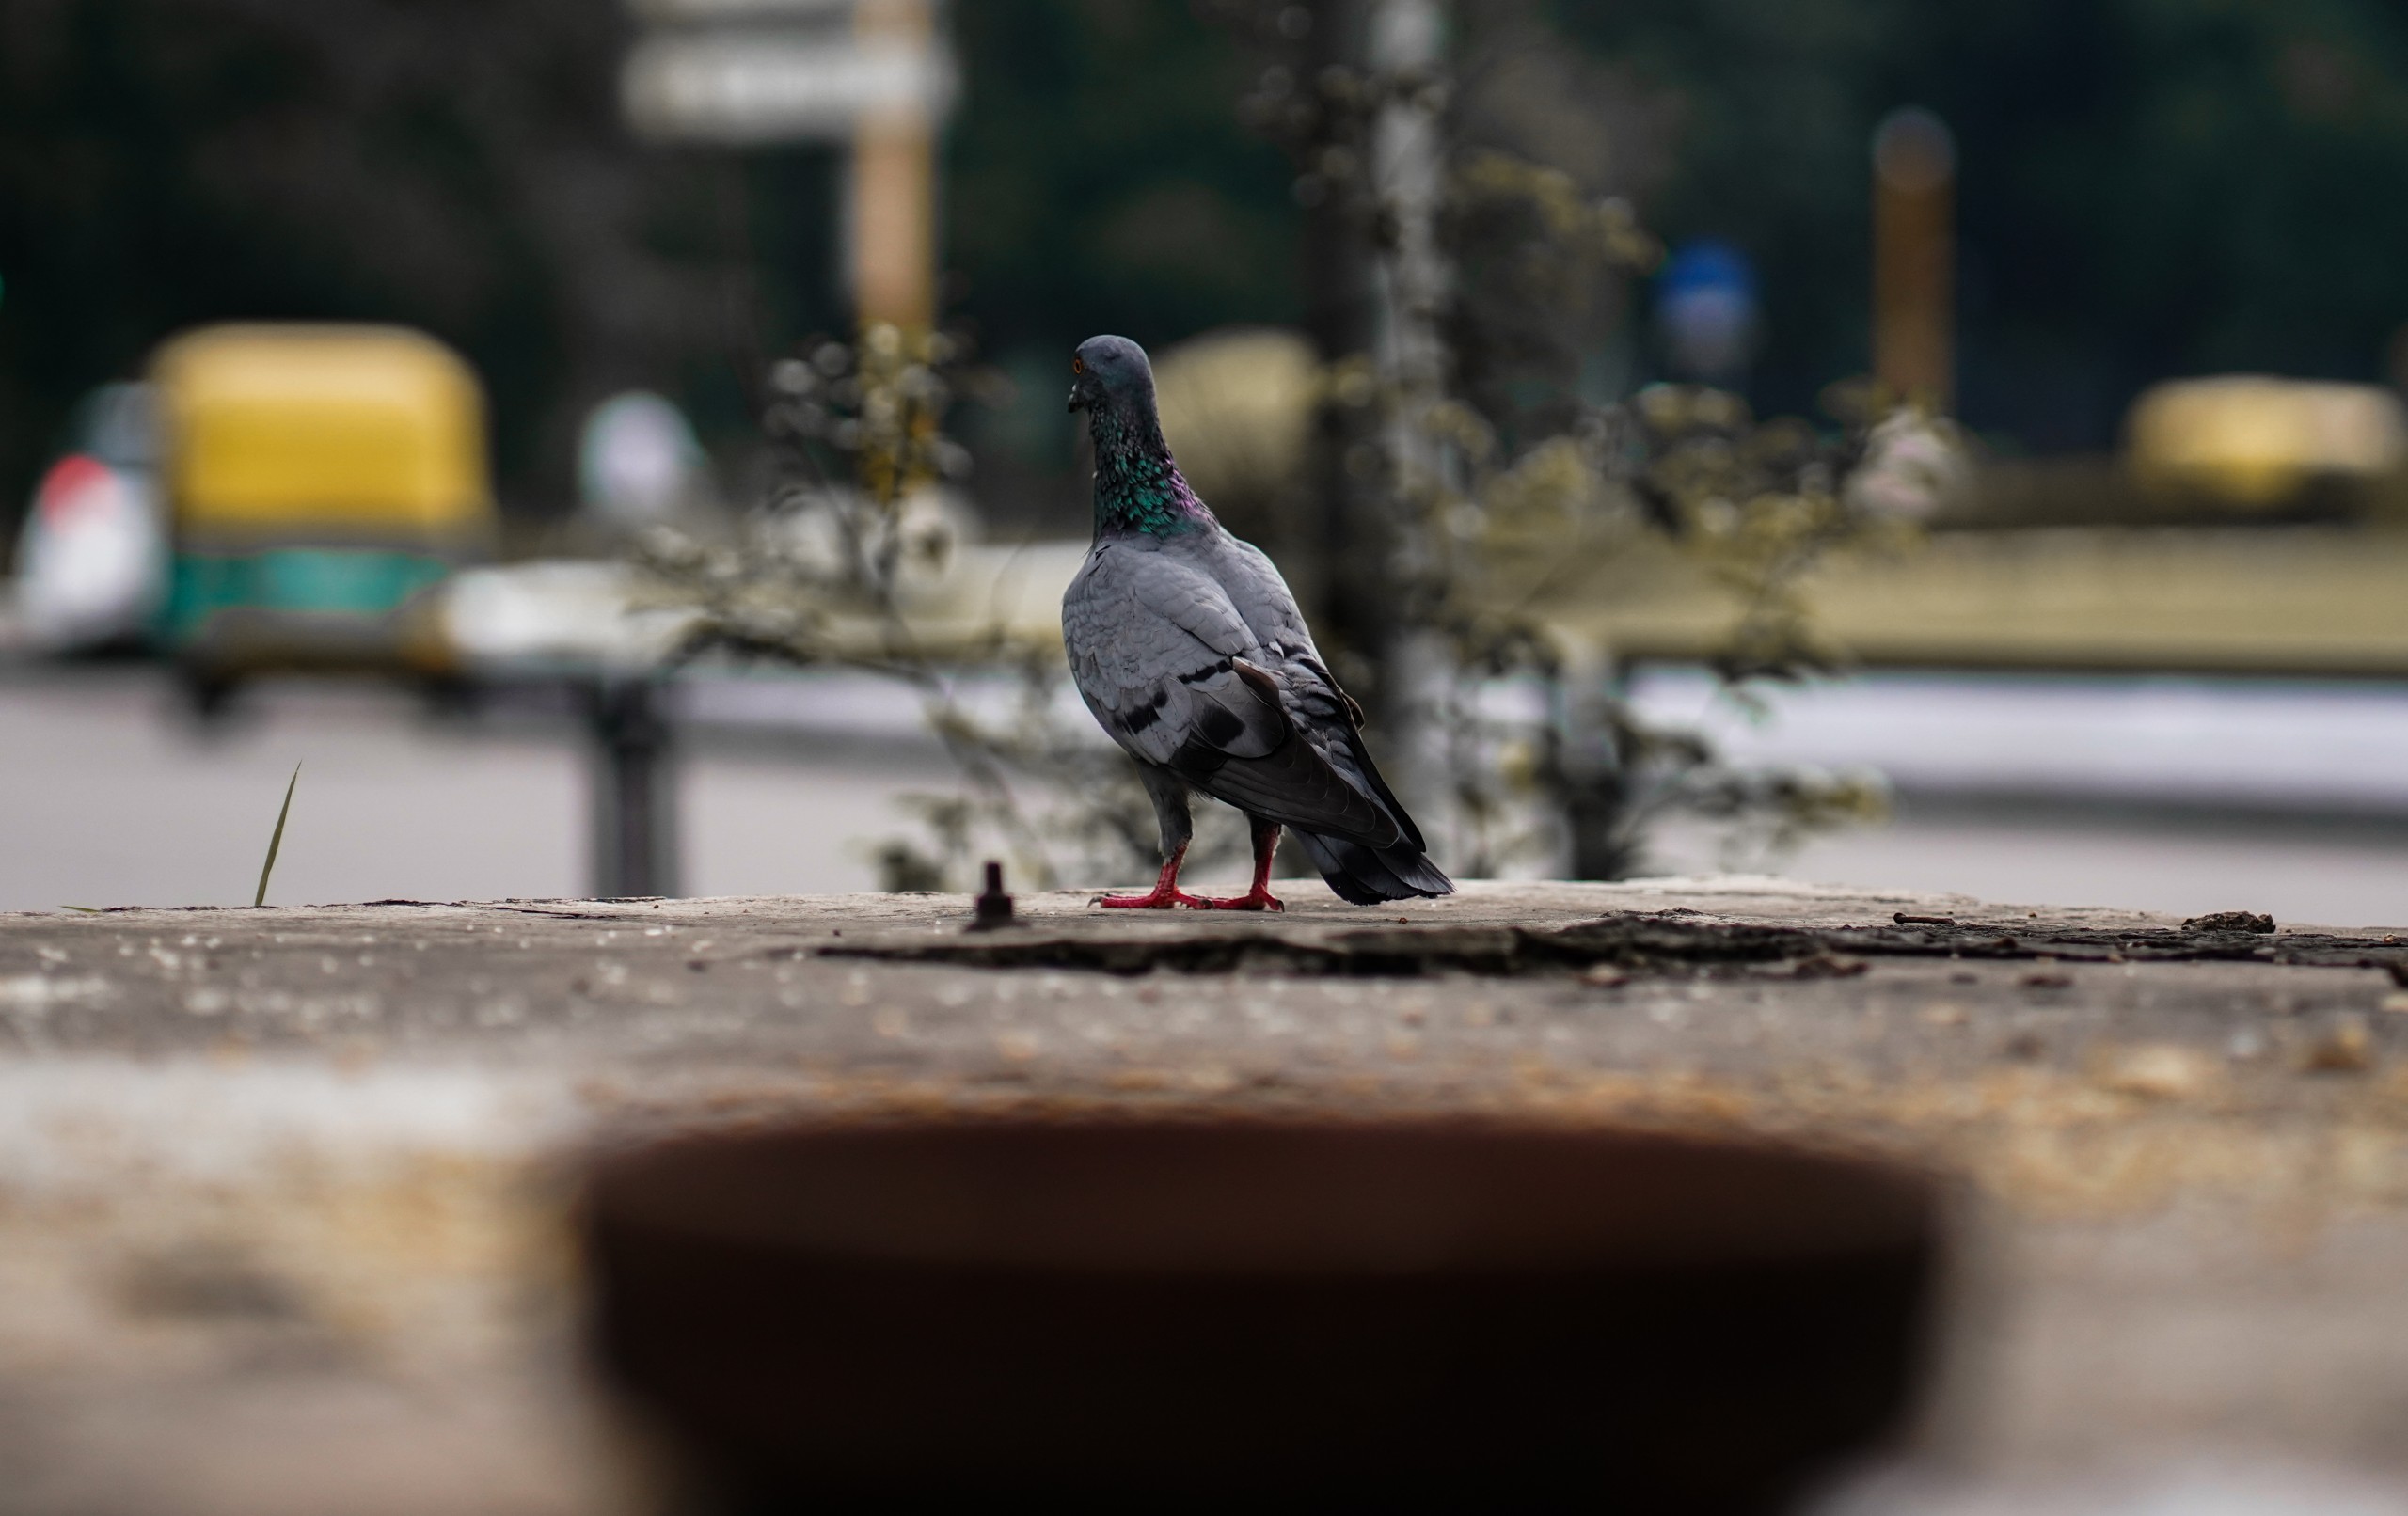 A Pigeon in the City